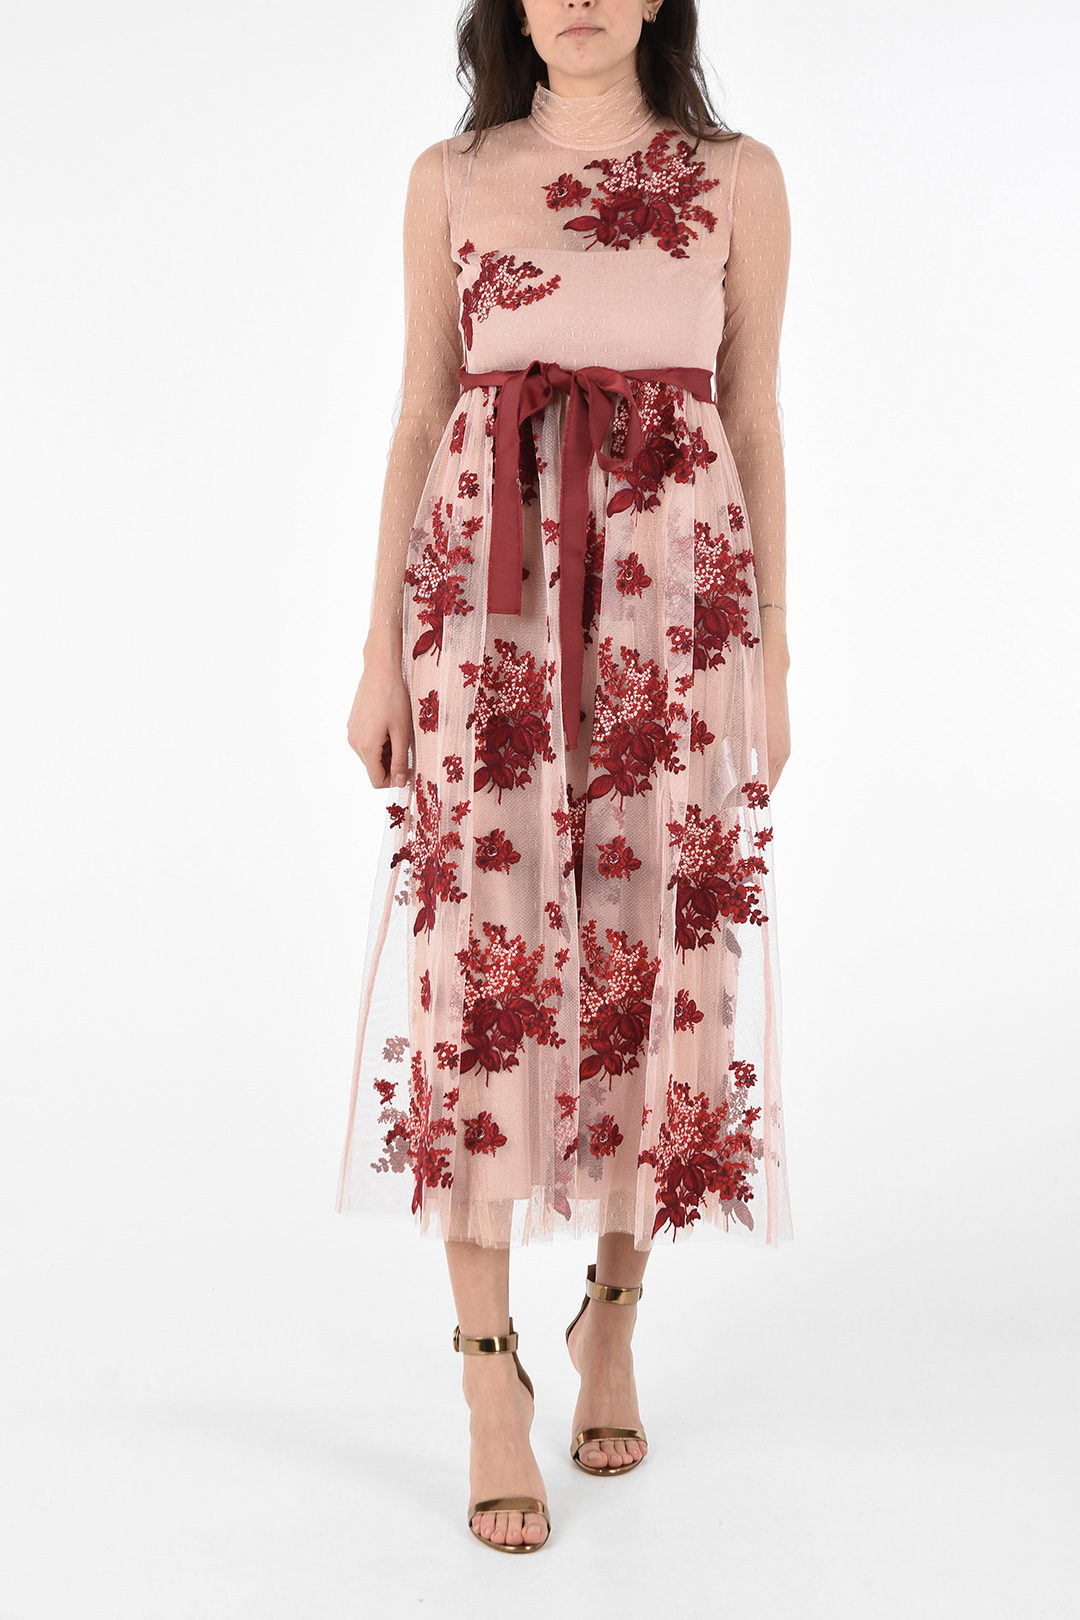 Red Valentino Floral Embroidered Long 